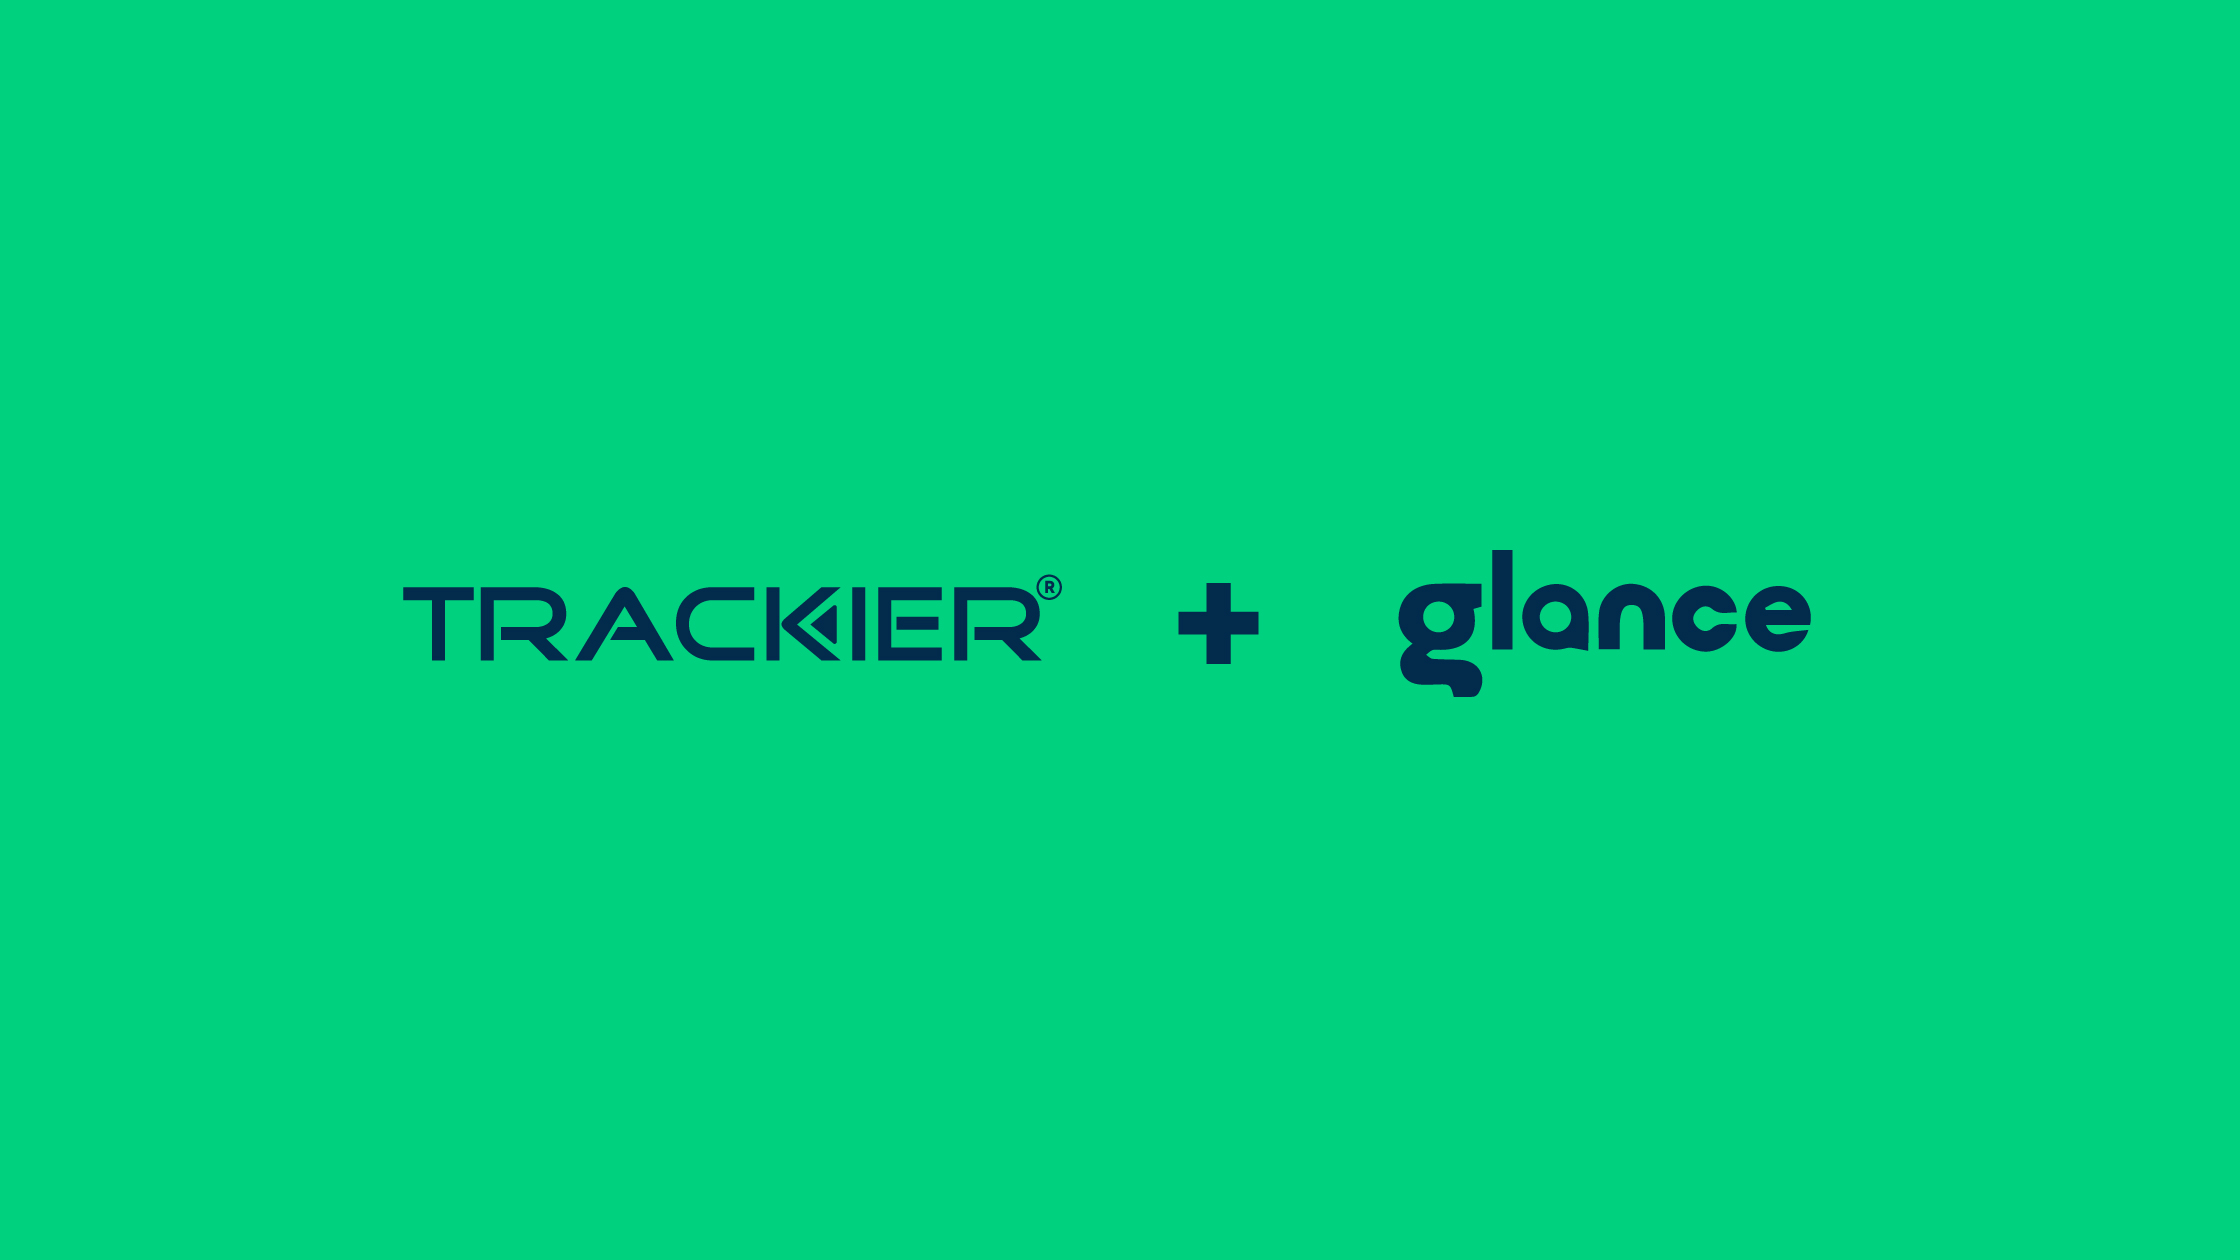 A social banner announcing trackier and glance digital experiences integration with MMP.